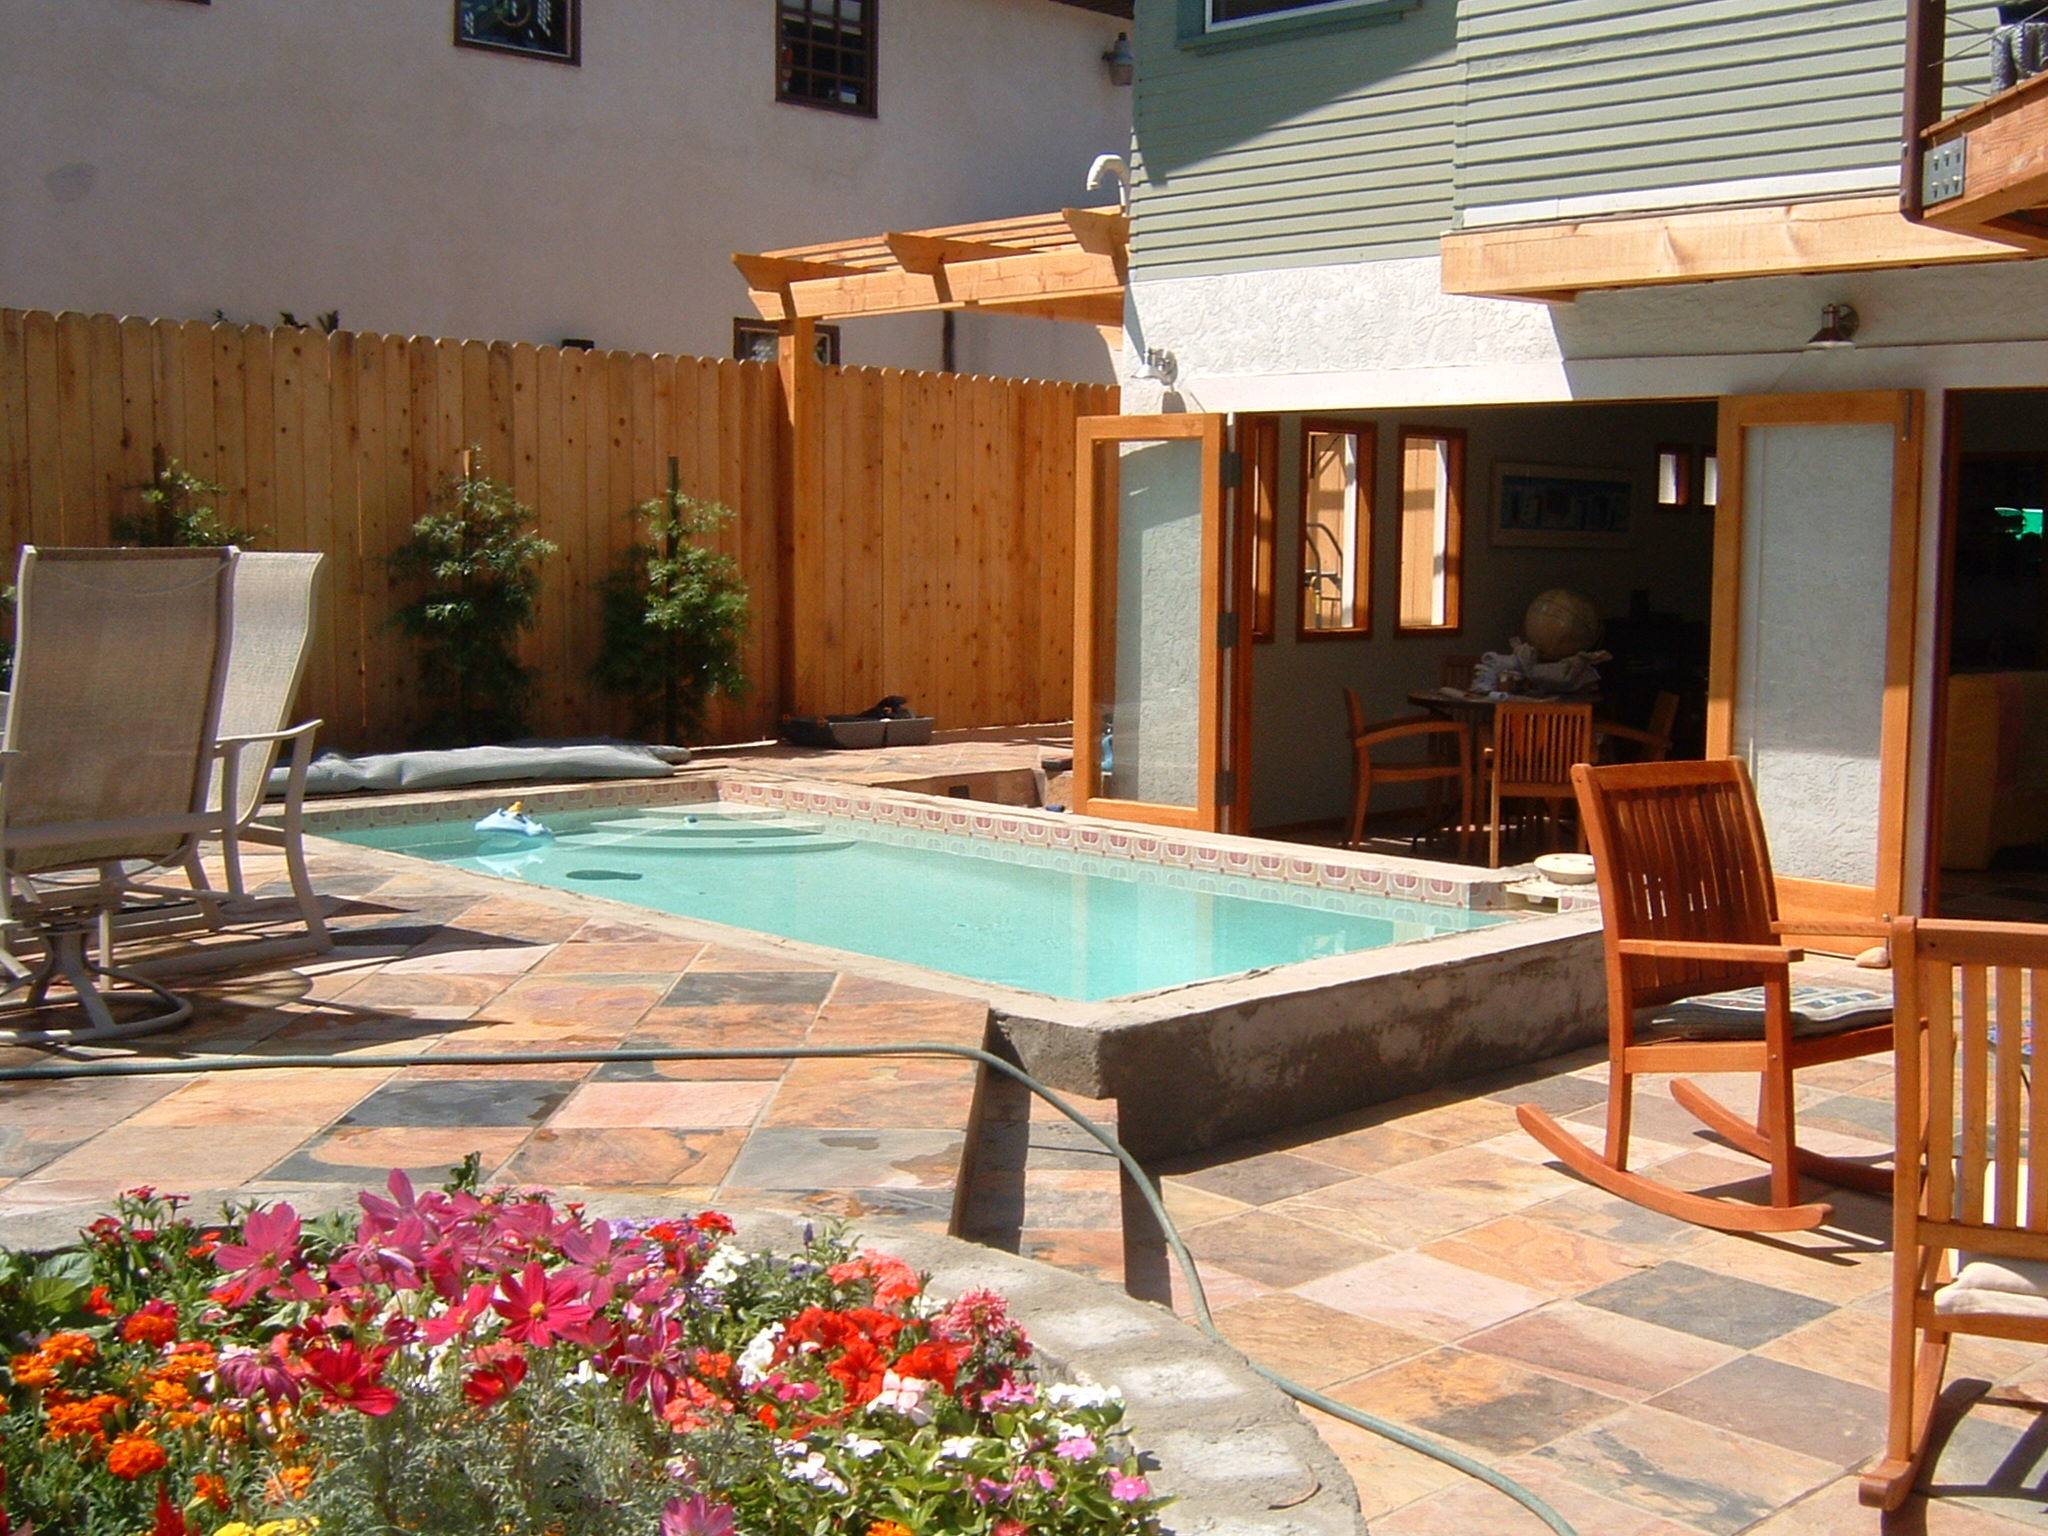  Patio, pool and full opening glass doors create a nearly seamless transition from indoors to outdoors. 